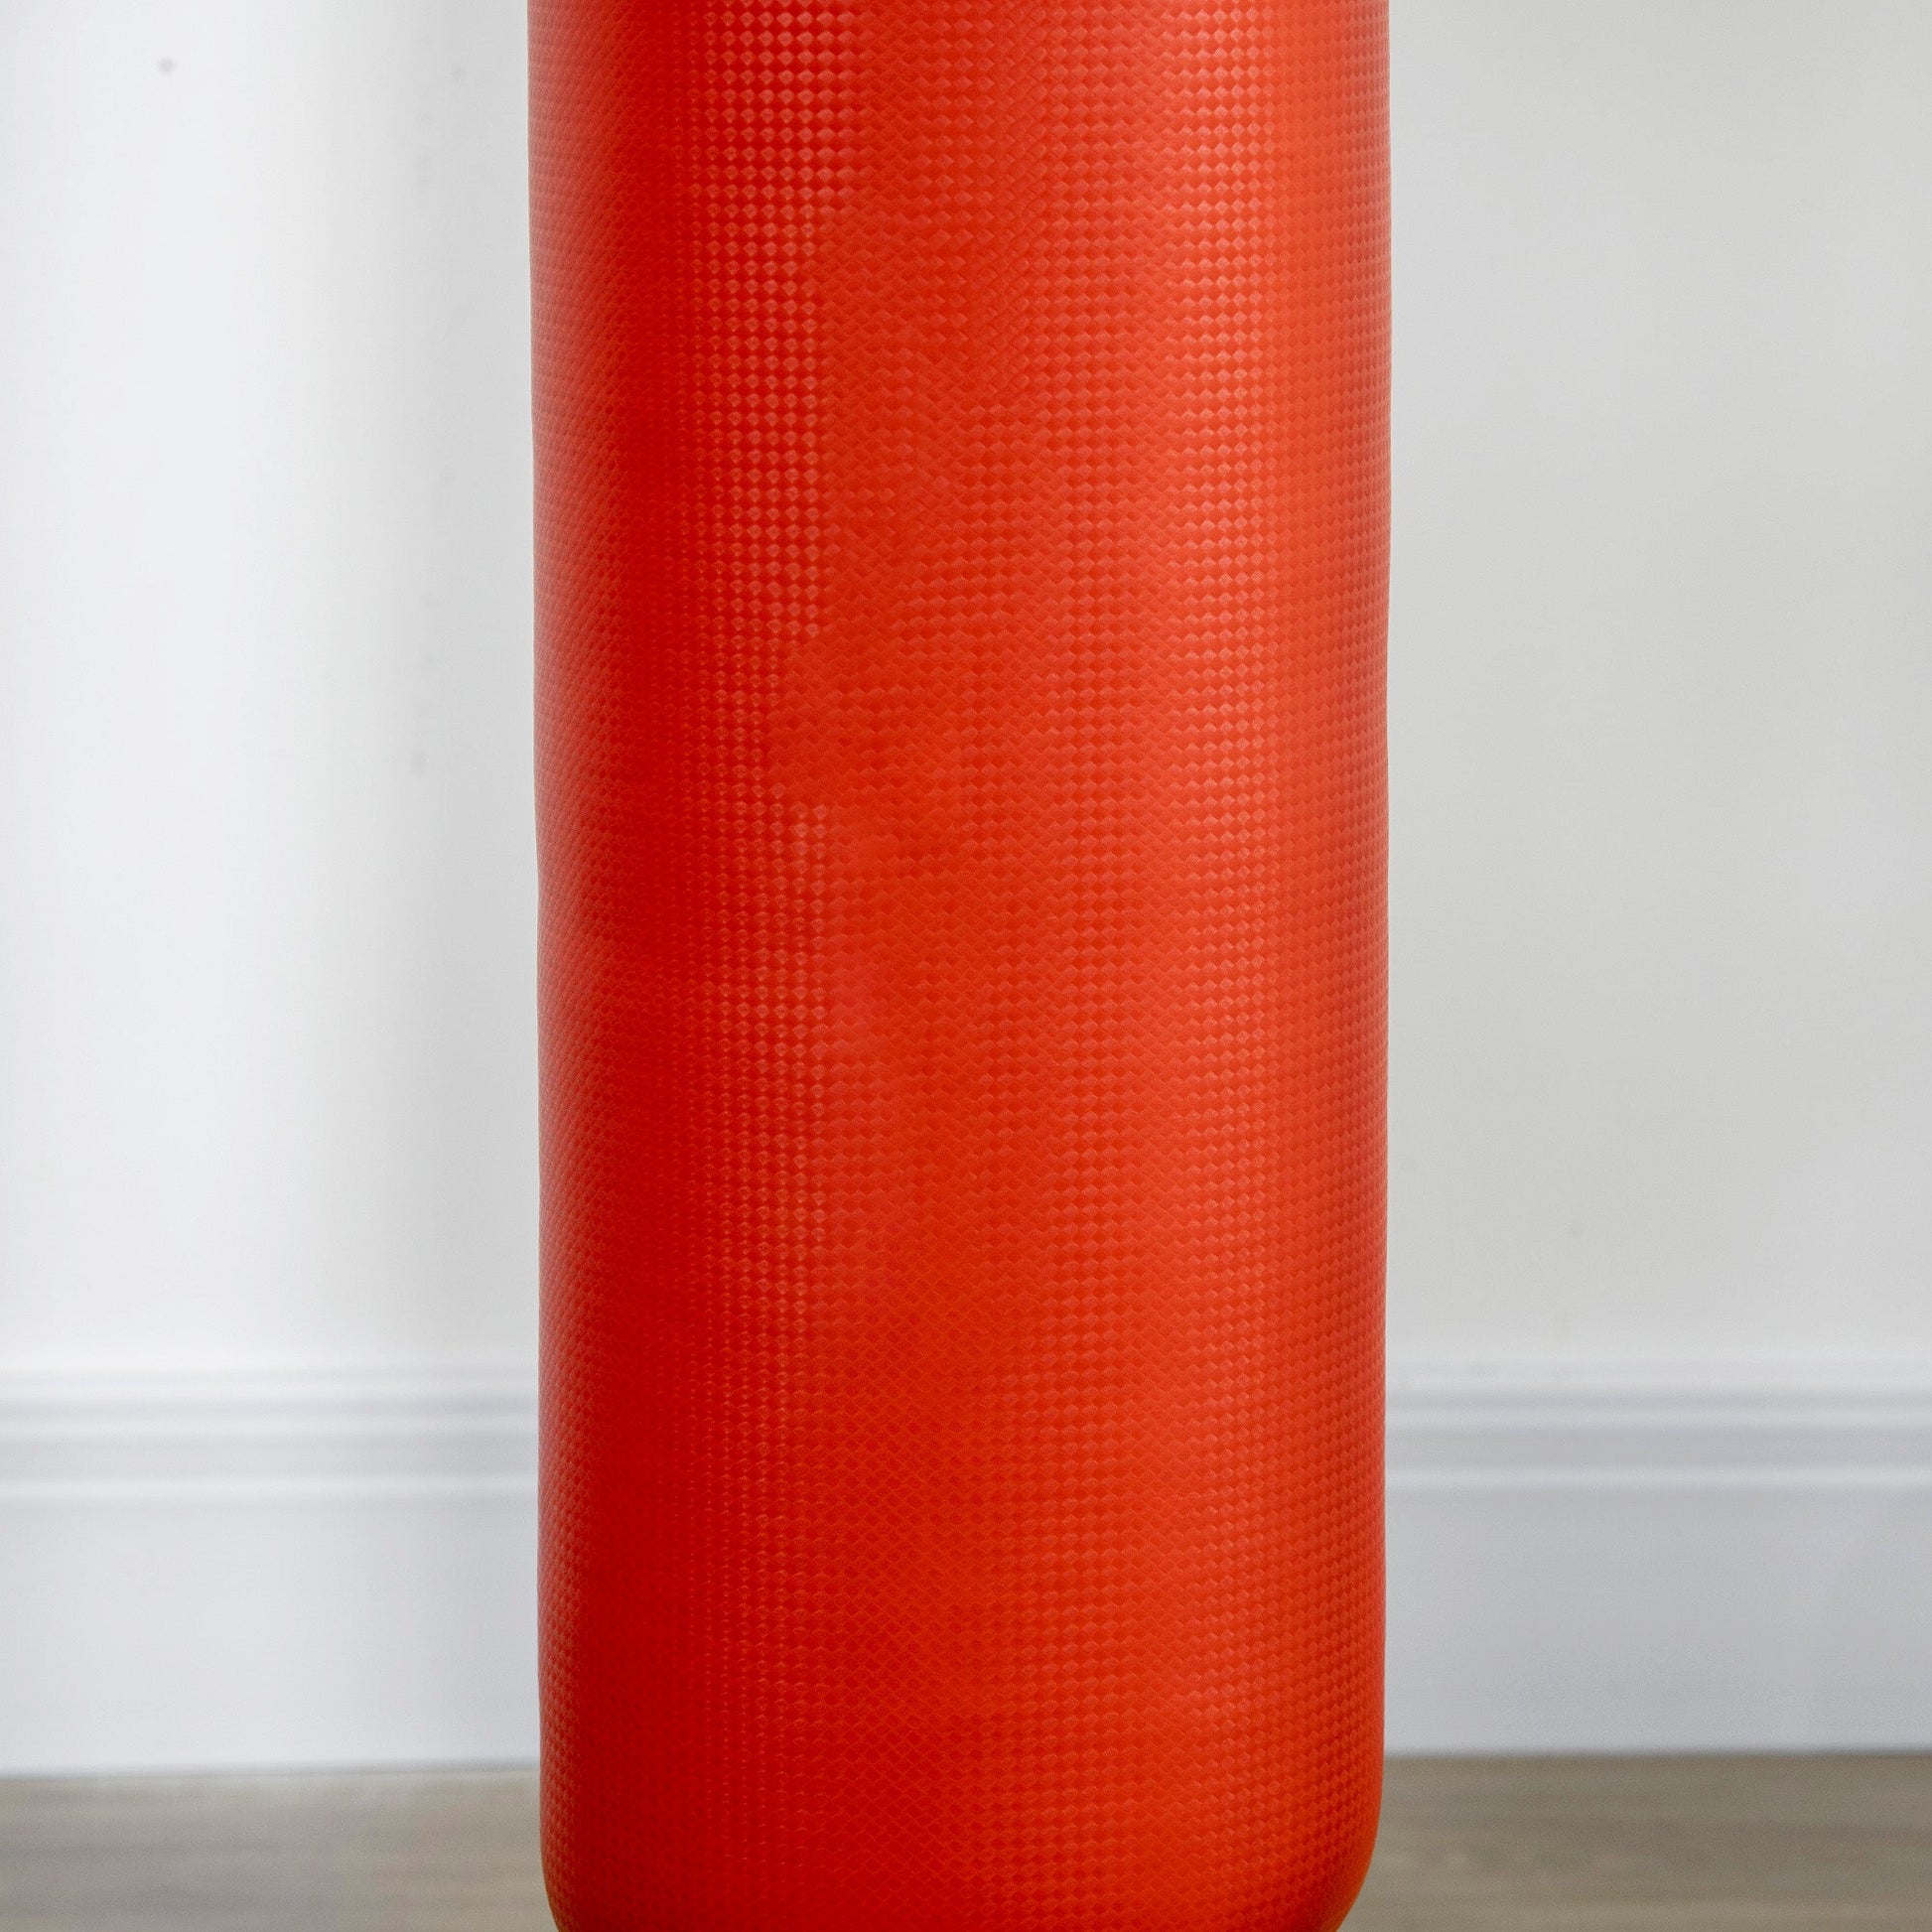 Freestanding Boxing Punching Bag, Height Adjustable, with Reflex Bar, Speed Balls and Suction Cup Base, Multi at Gallery Canada